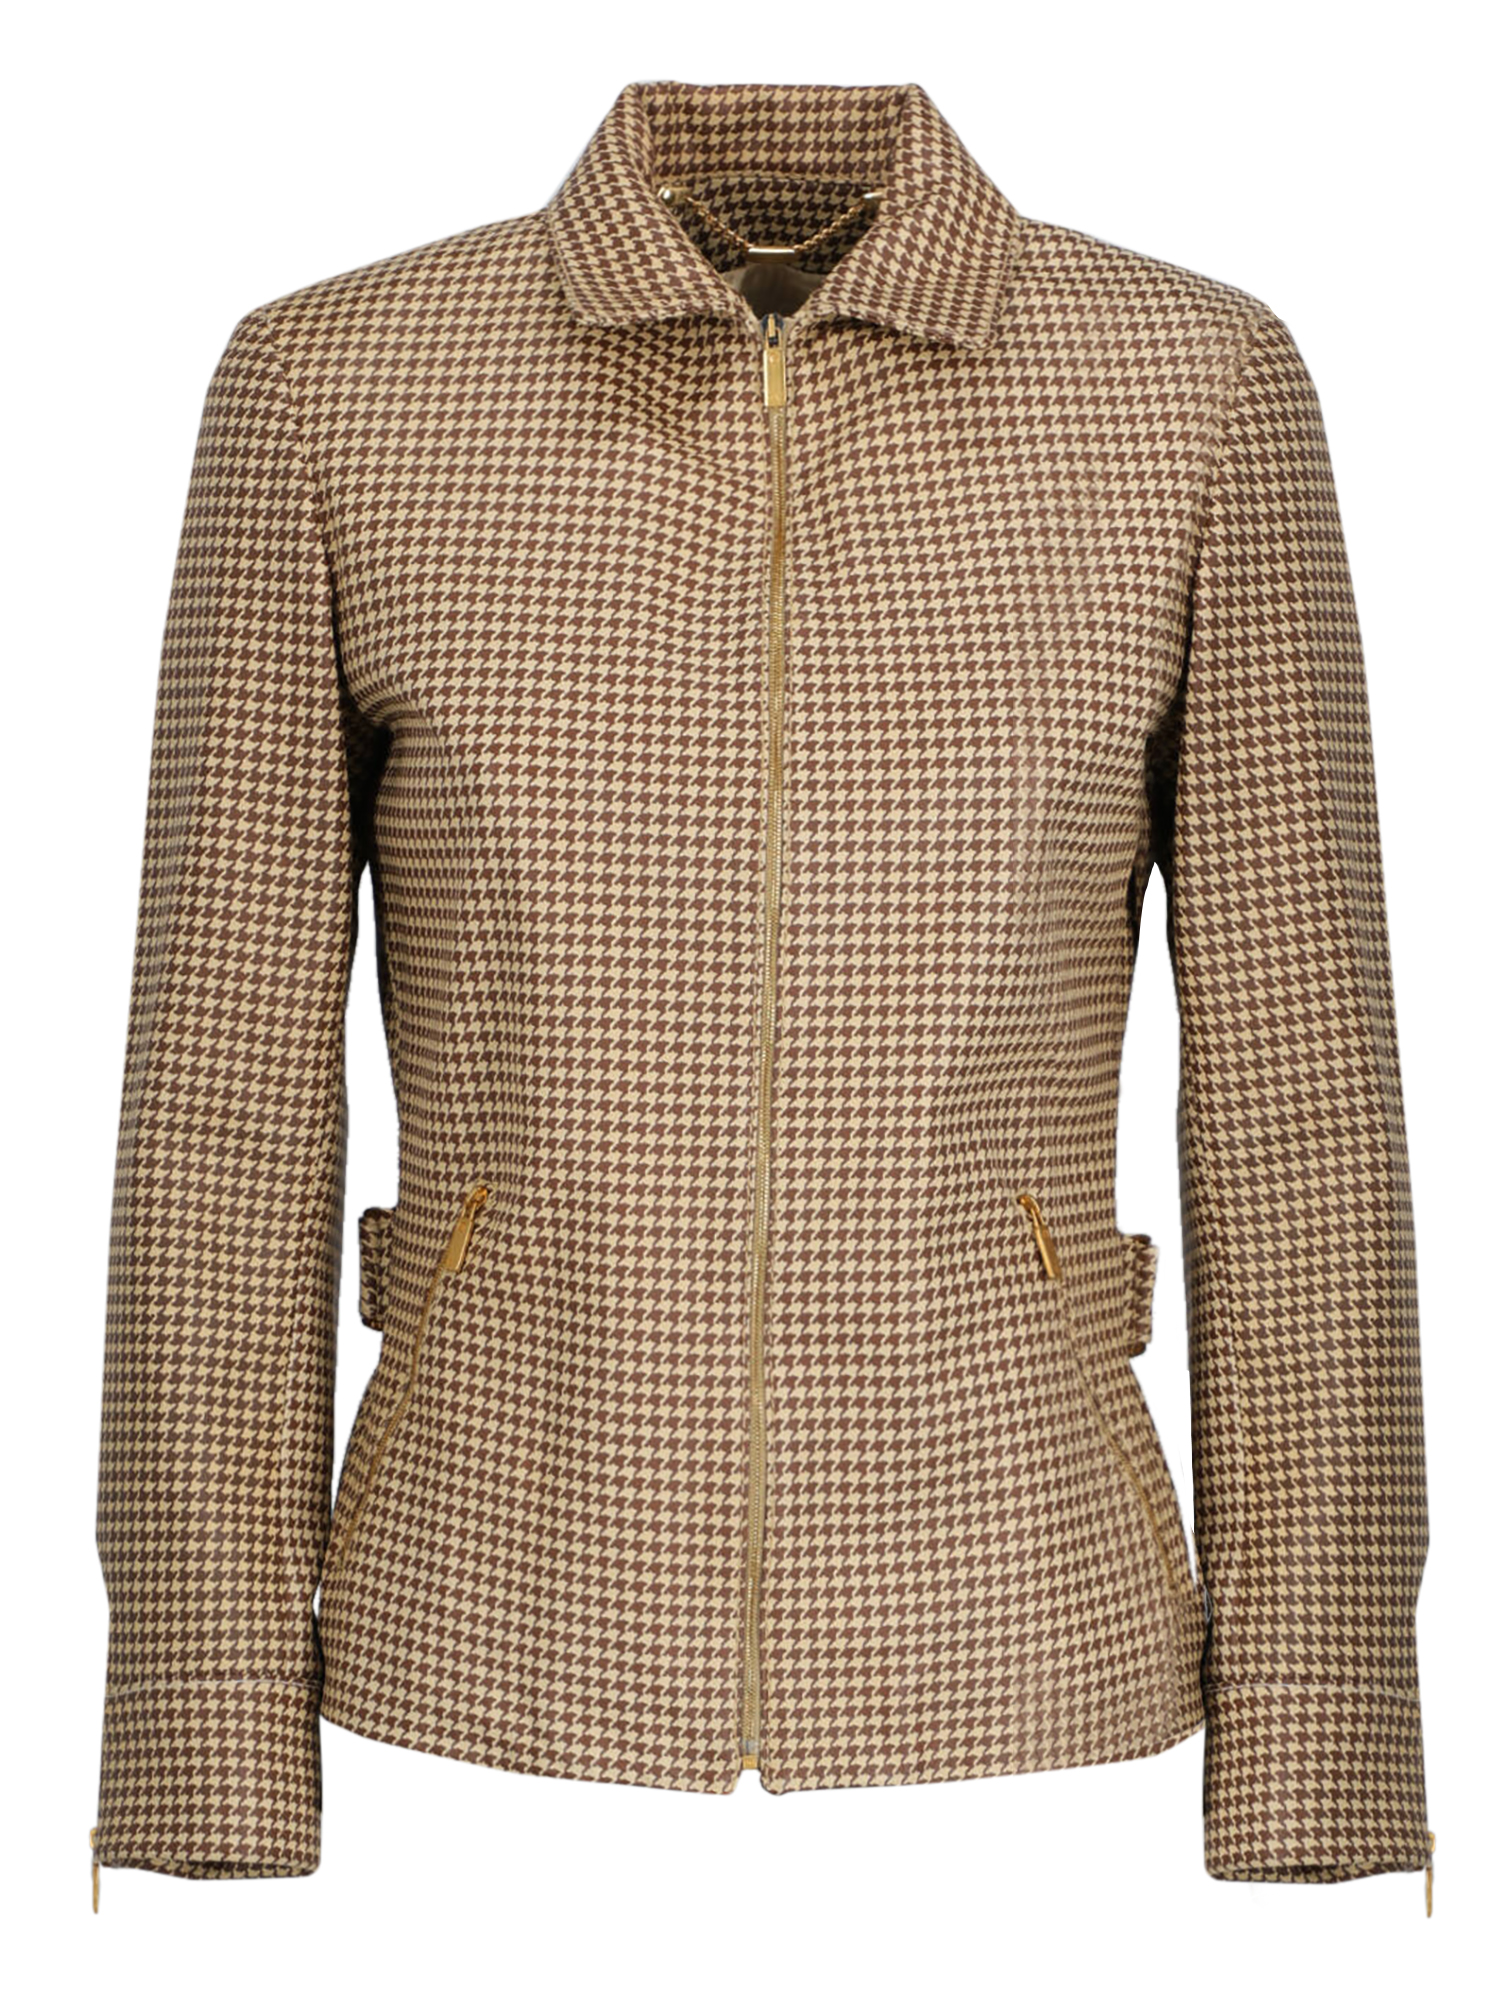 Condition: Very Good, Houndstooth Synthetic Fibers, Color: Beige - M - US 6 -